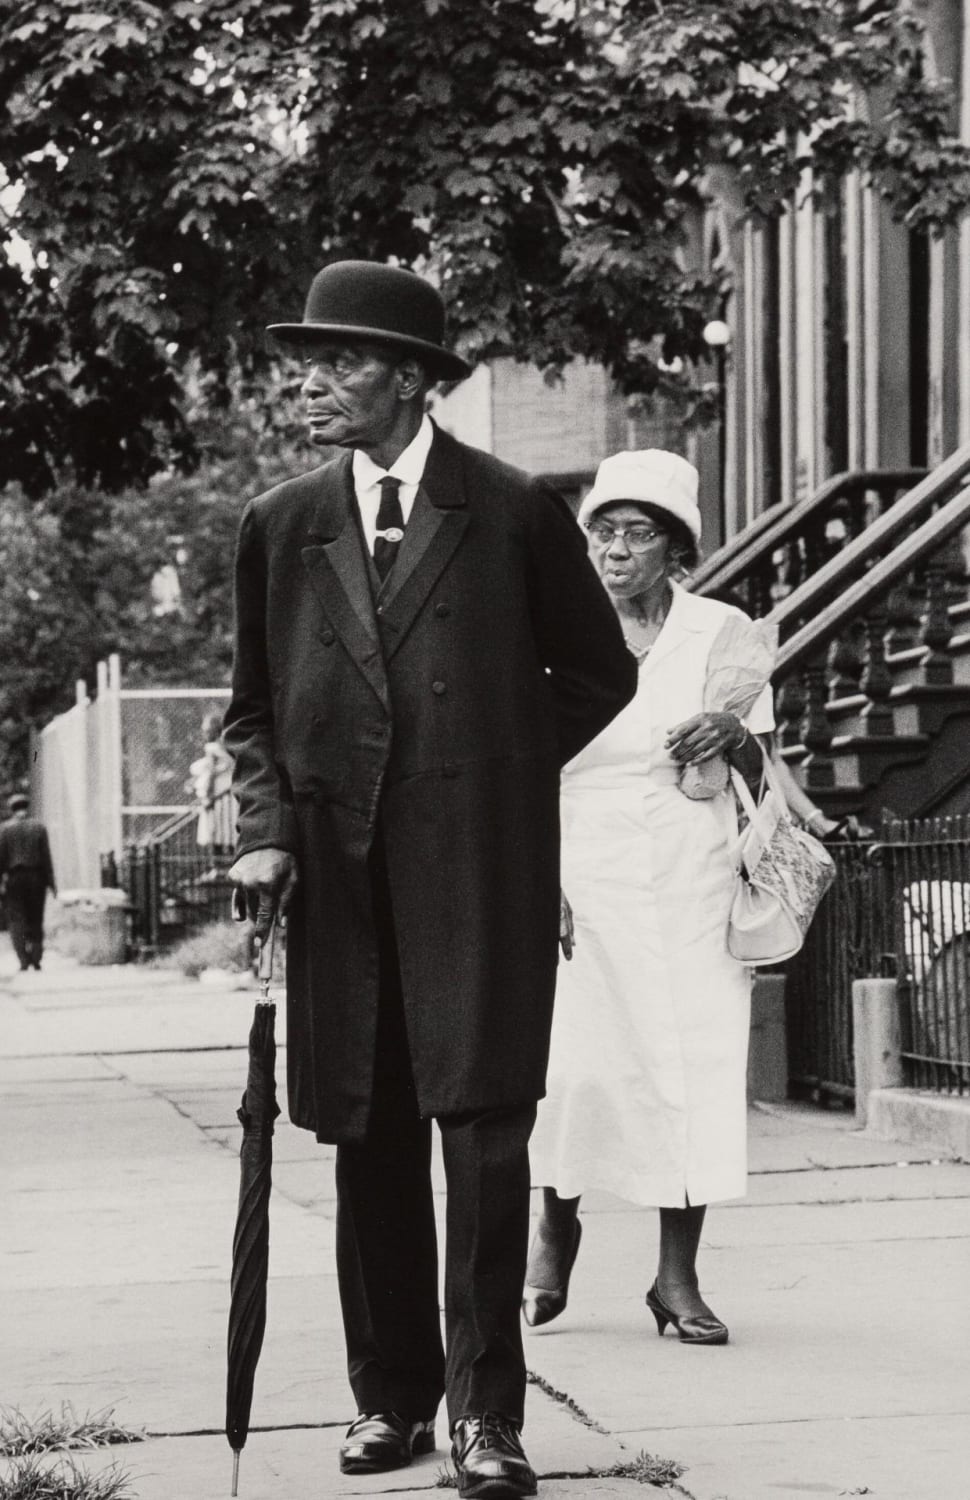 Distinguished couple on the way to church, Brooklyn, New York, 1963.